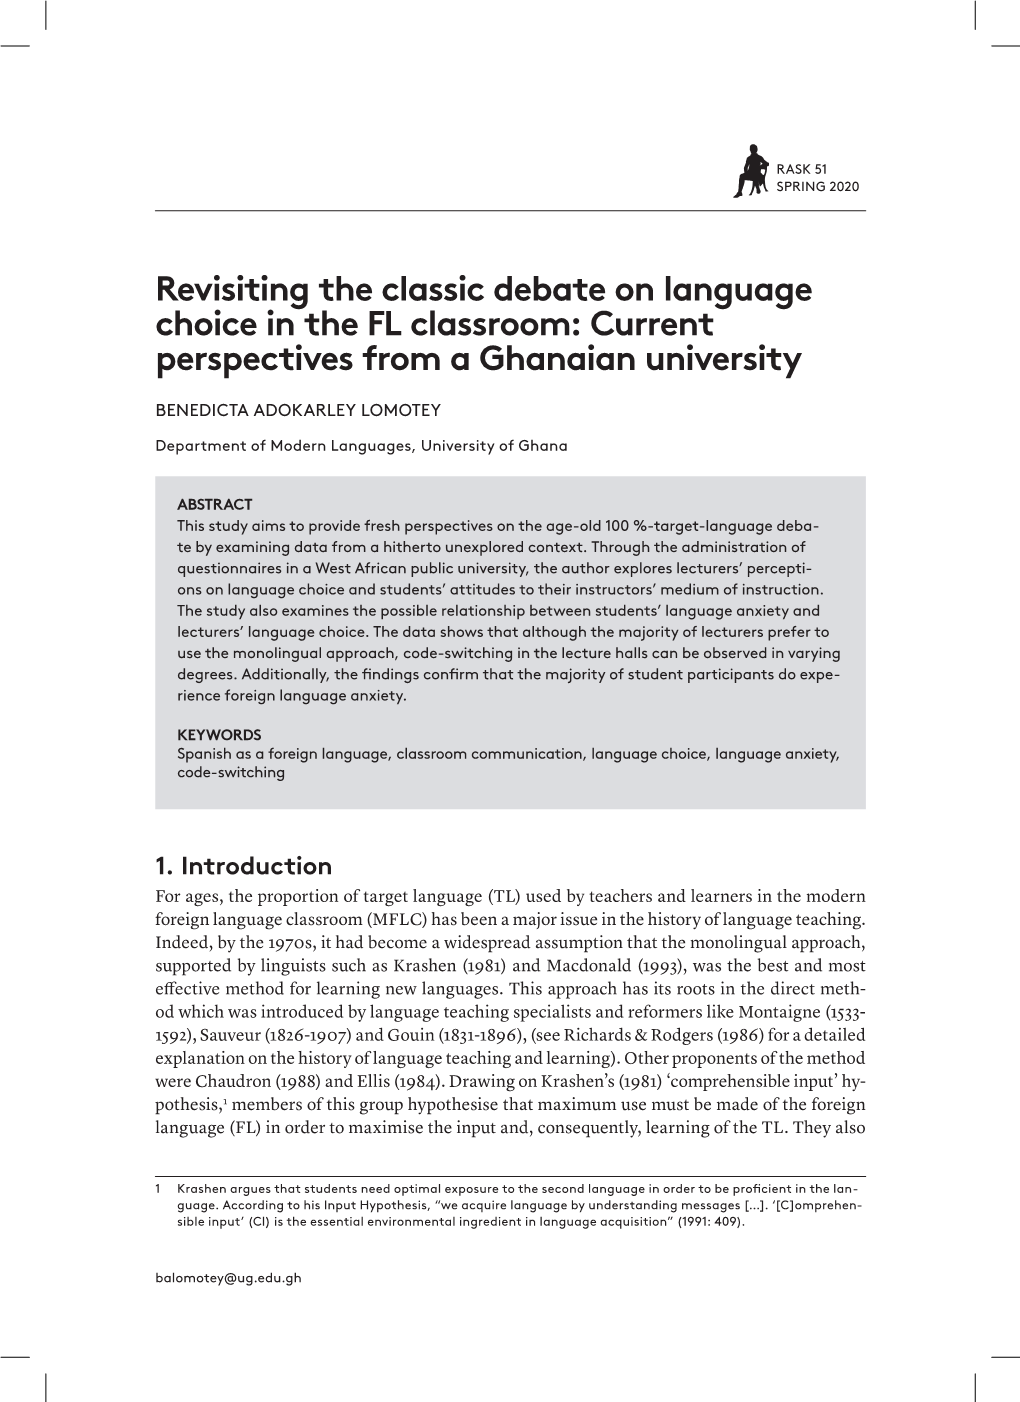 Revisiting the Classic Debate on Language Choice in the FL Classroom: Current Perspectives from a Ghanaian University